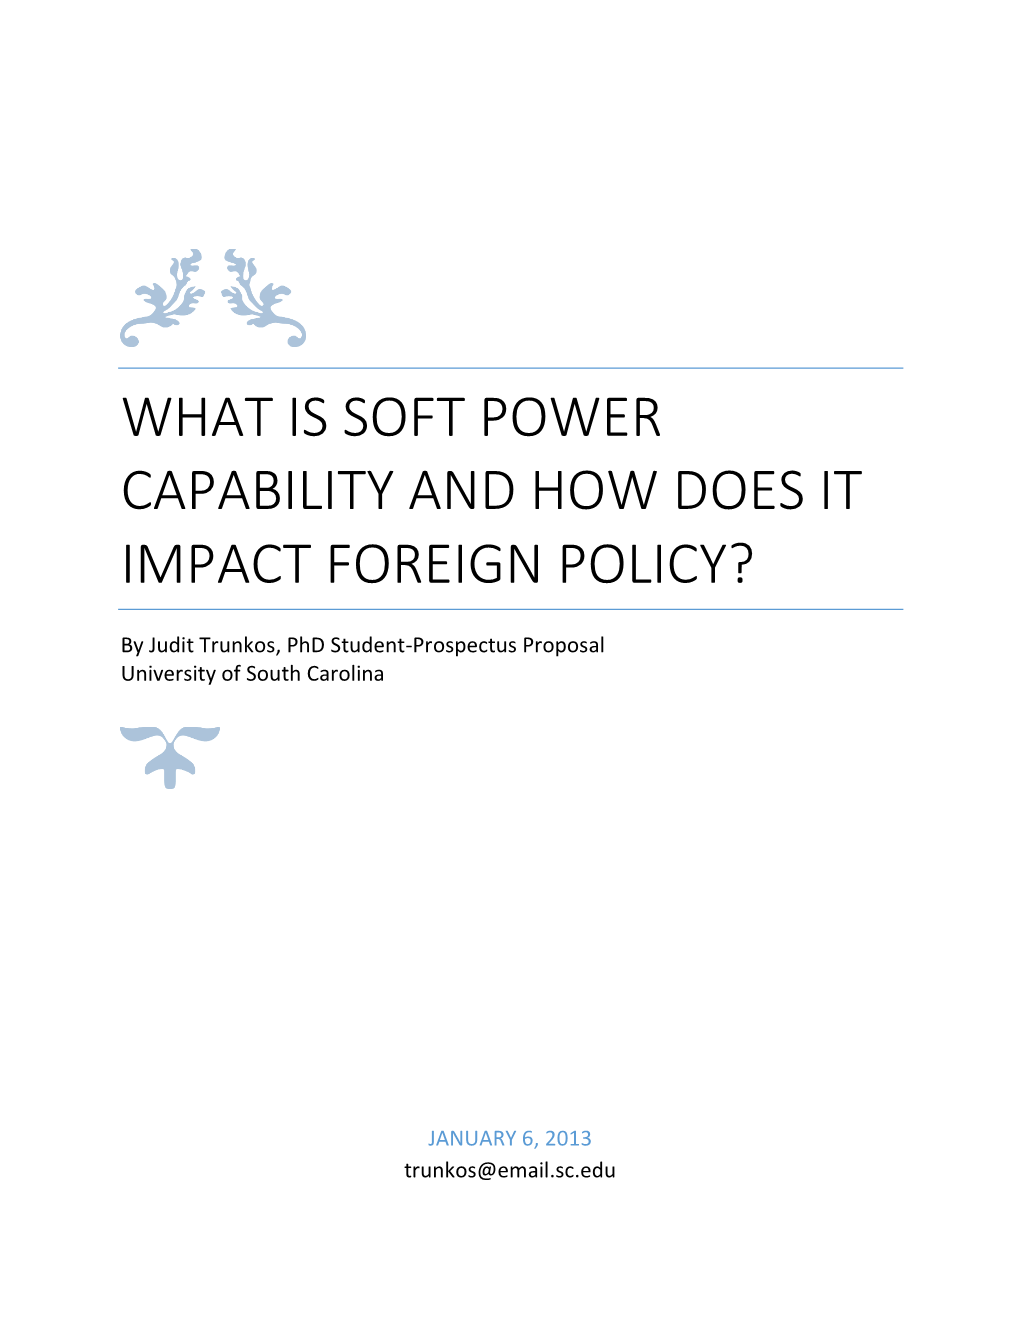 What Is Soft Power Capability and How Does It Impact Foreign Policy?